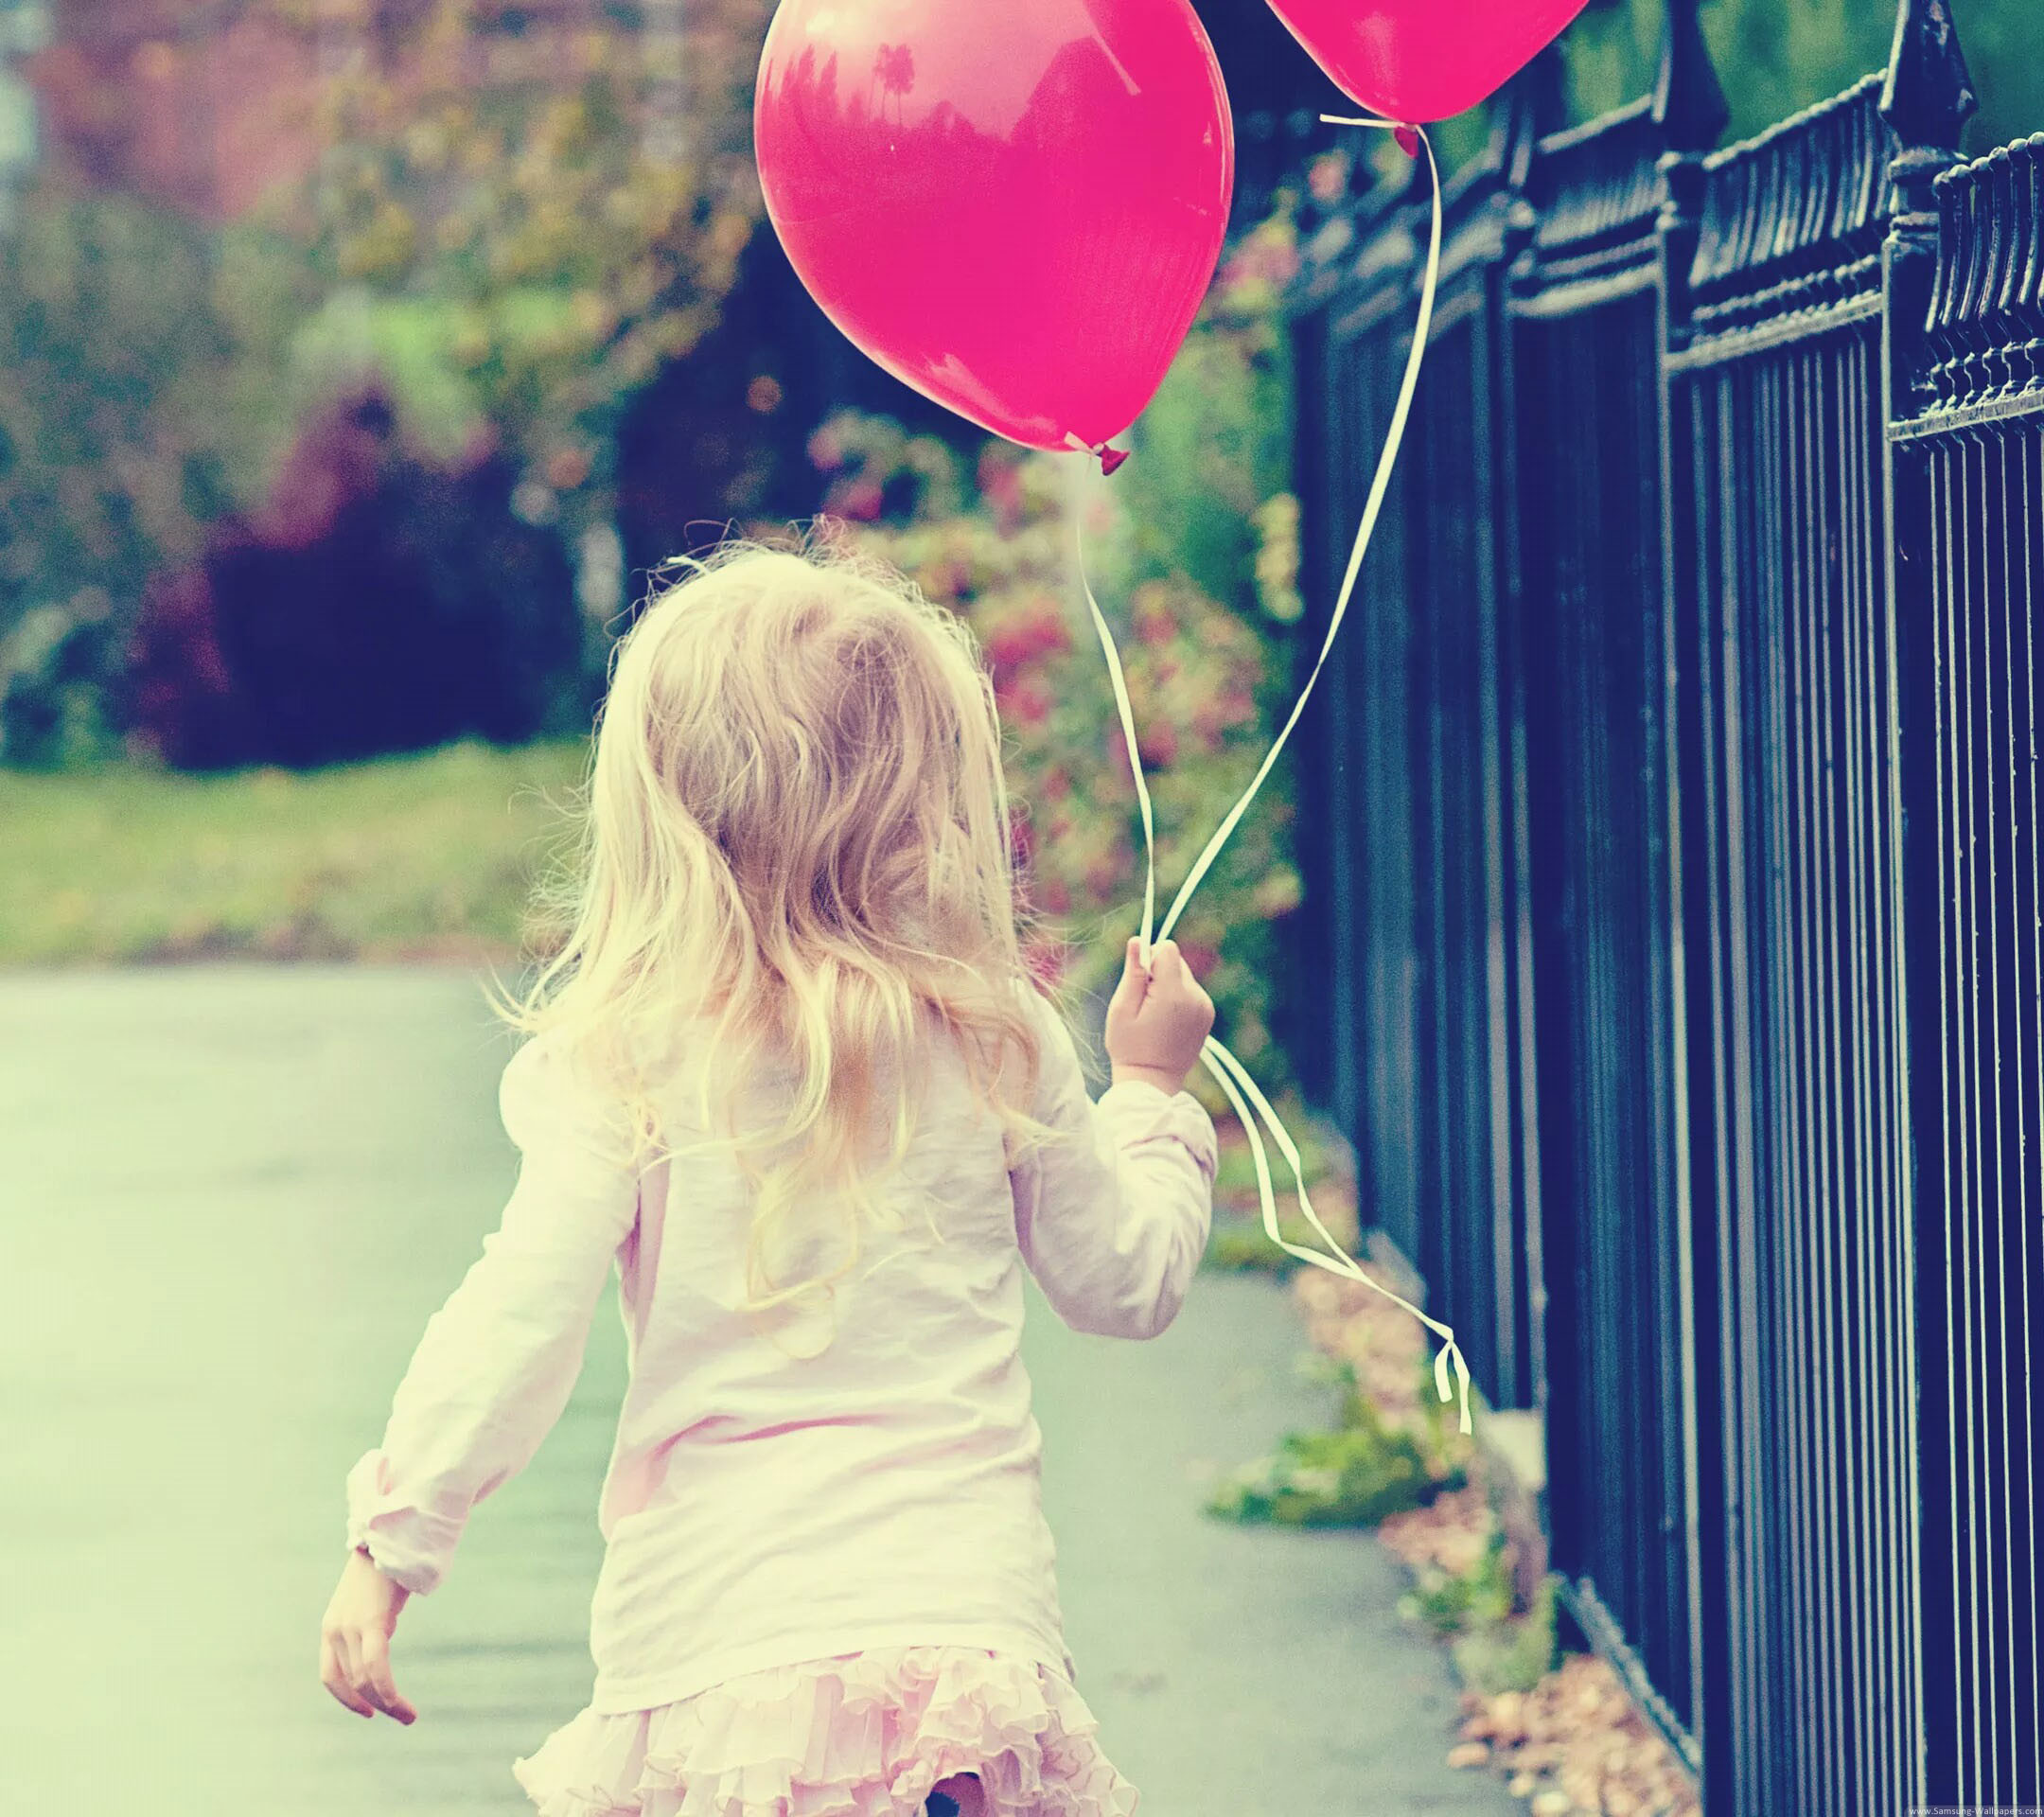 2160x1920 Balloons and Girls Lock Screen  Samsung Galaxy S4 Wallpapers